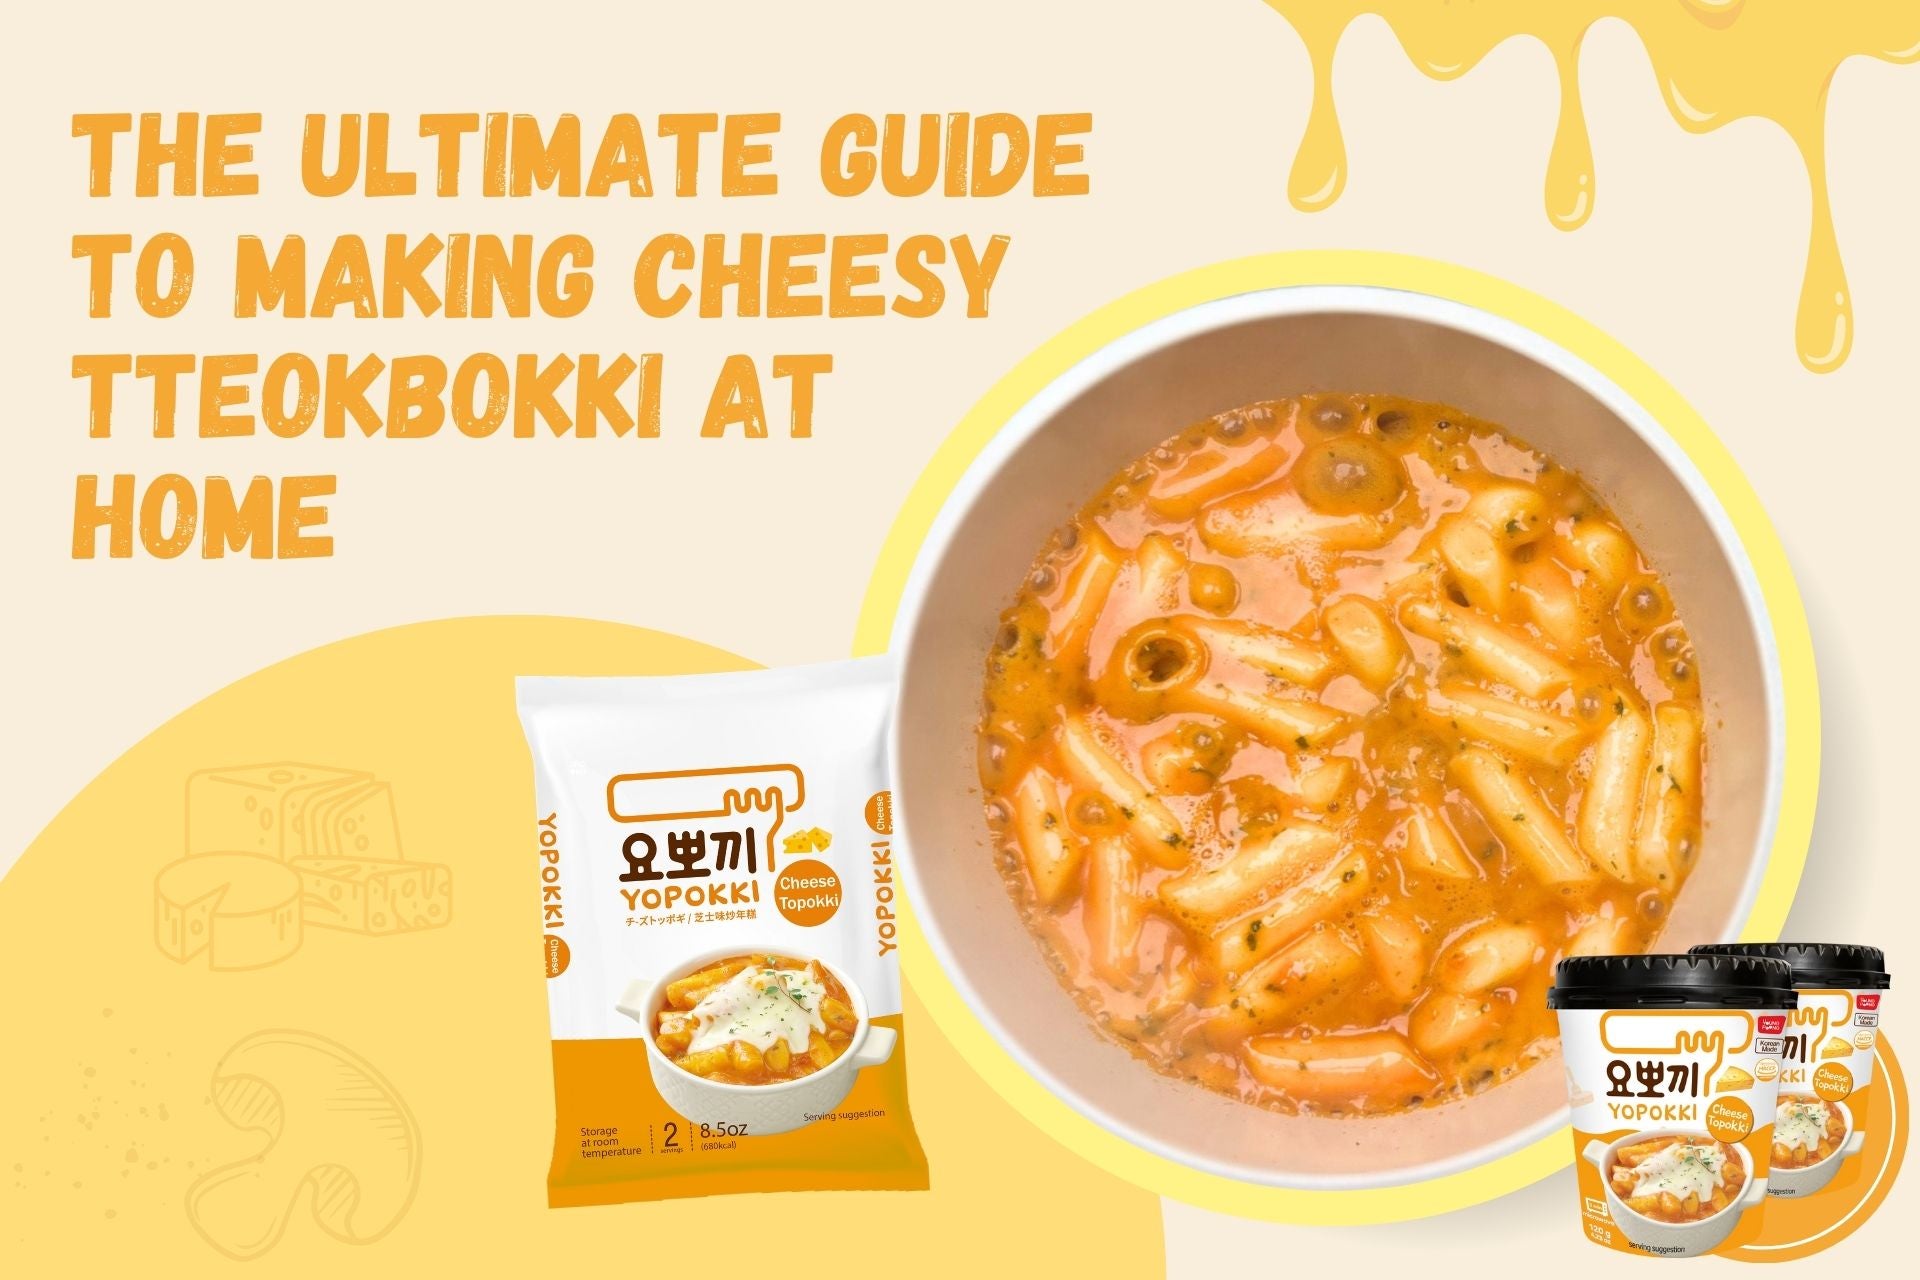 yopokki The Ultimate Guide to Making Cheesy Tteokbokki at Home